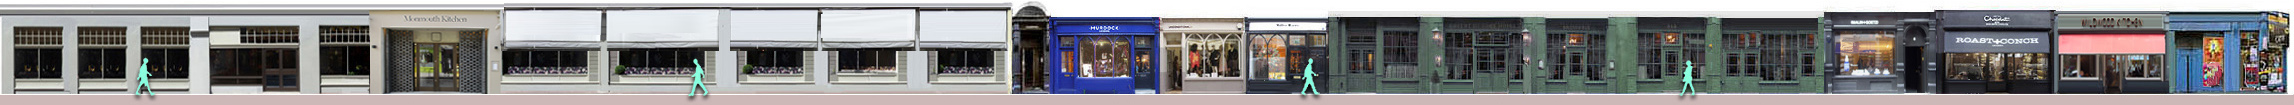 Monmouth Street shops and restaurants: Monmouth Kitchen, Unconditional + clothing, Miller Harris, Brasserie Max, Wildwood